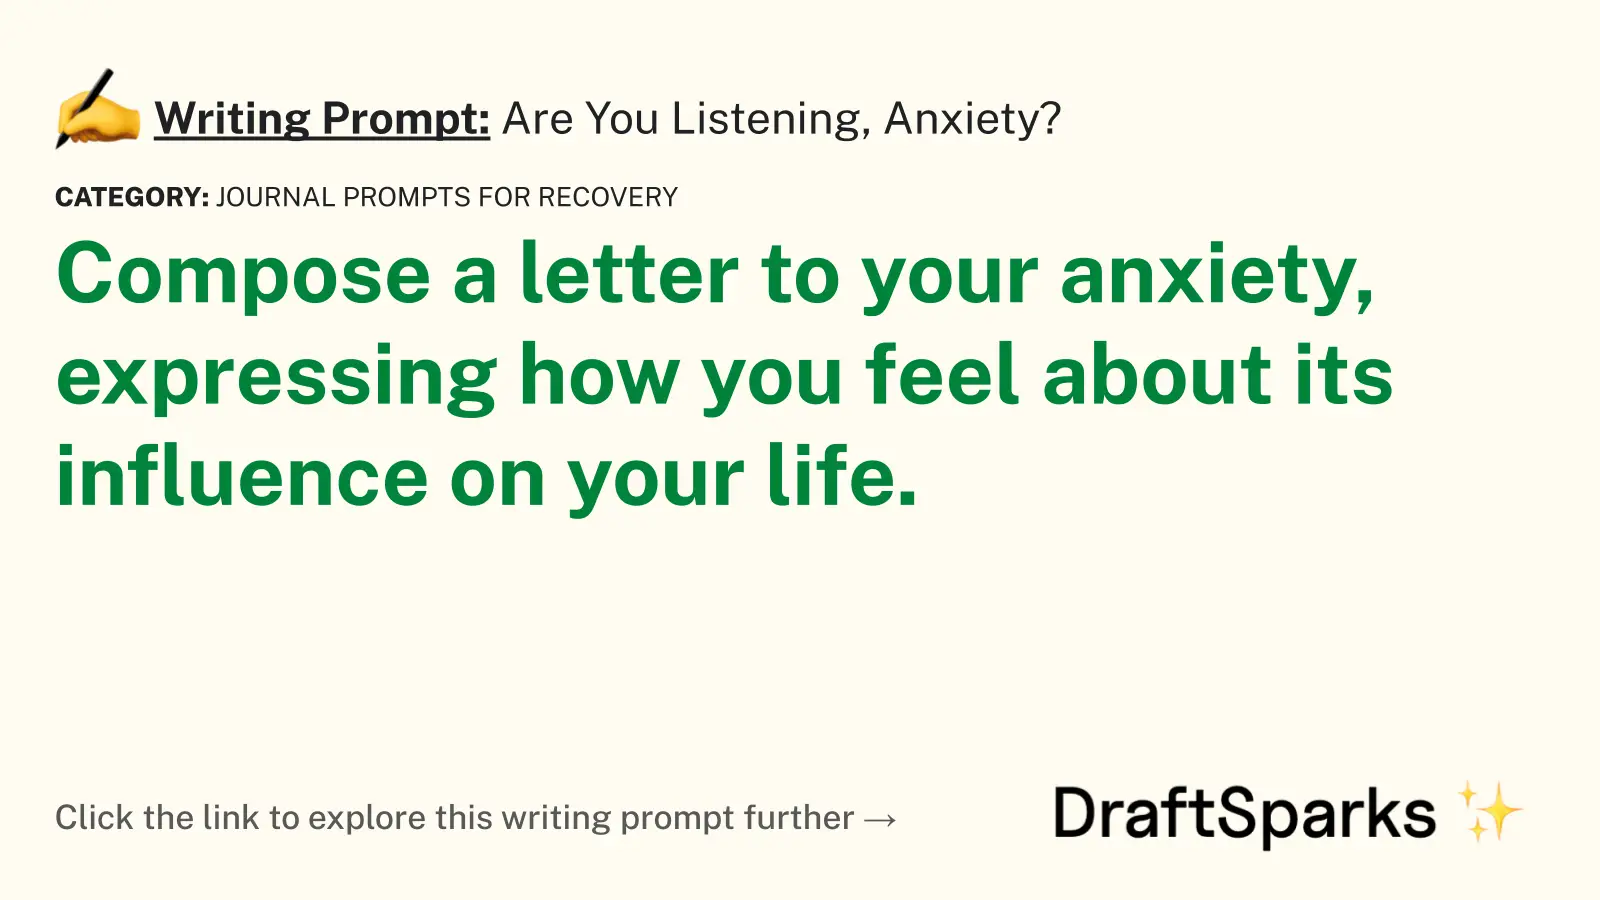 Are You Listening, Anxiety?